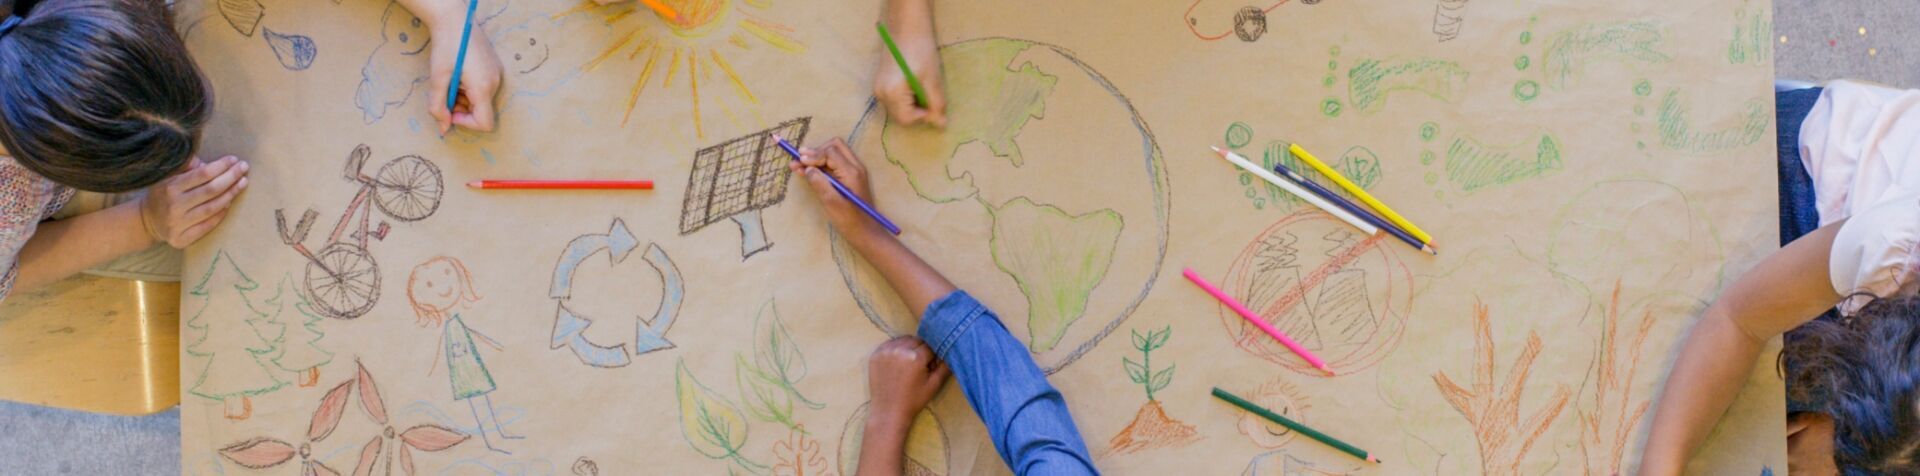 Bird’s-eye view of children’s hands sketching environmentally-friendly images of Earth, solar power, etc. in colored pencils on a large paper canvas.